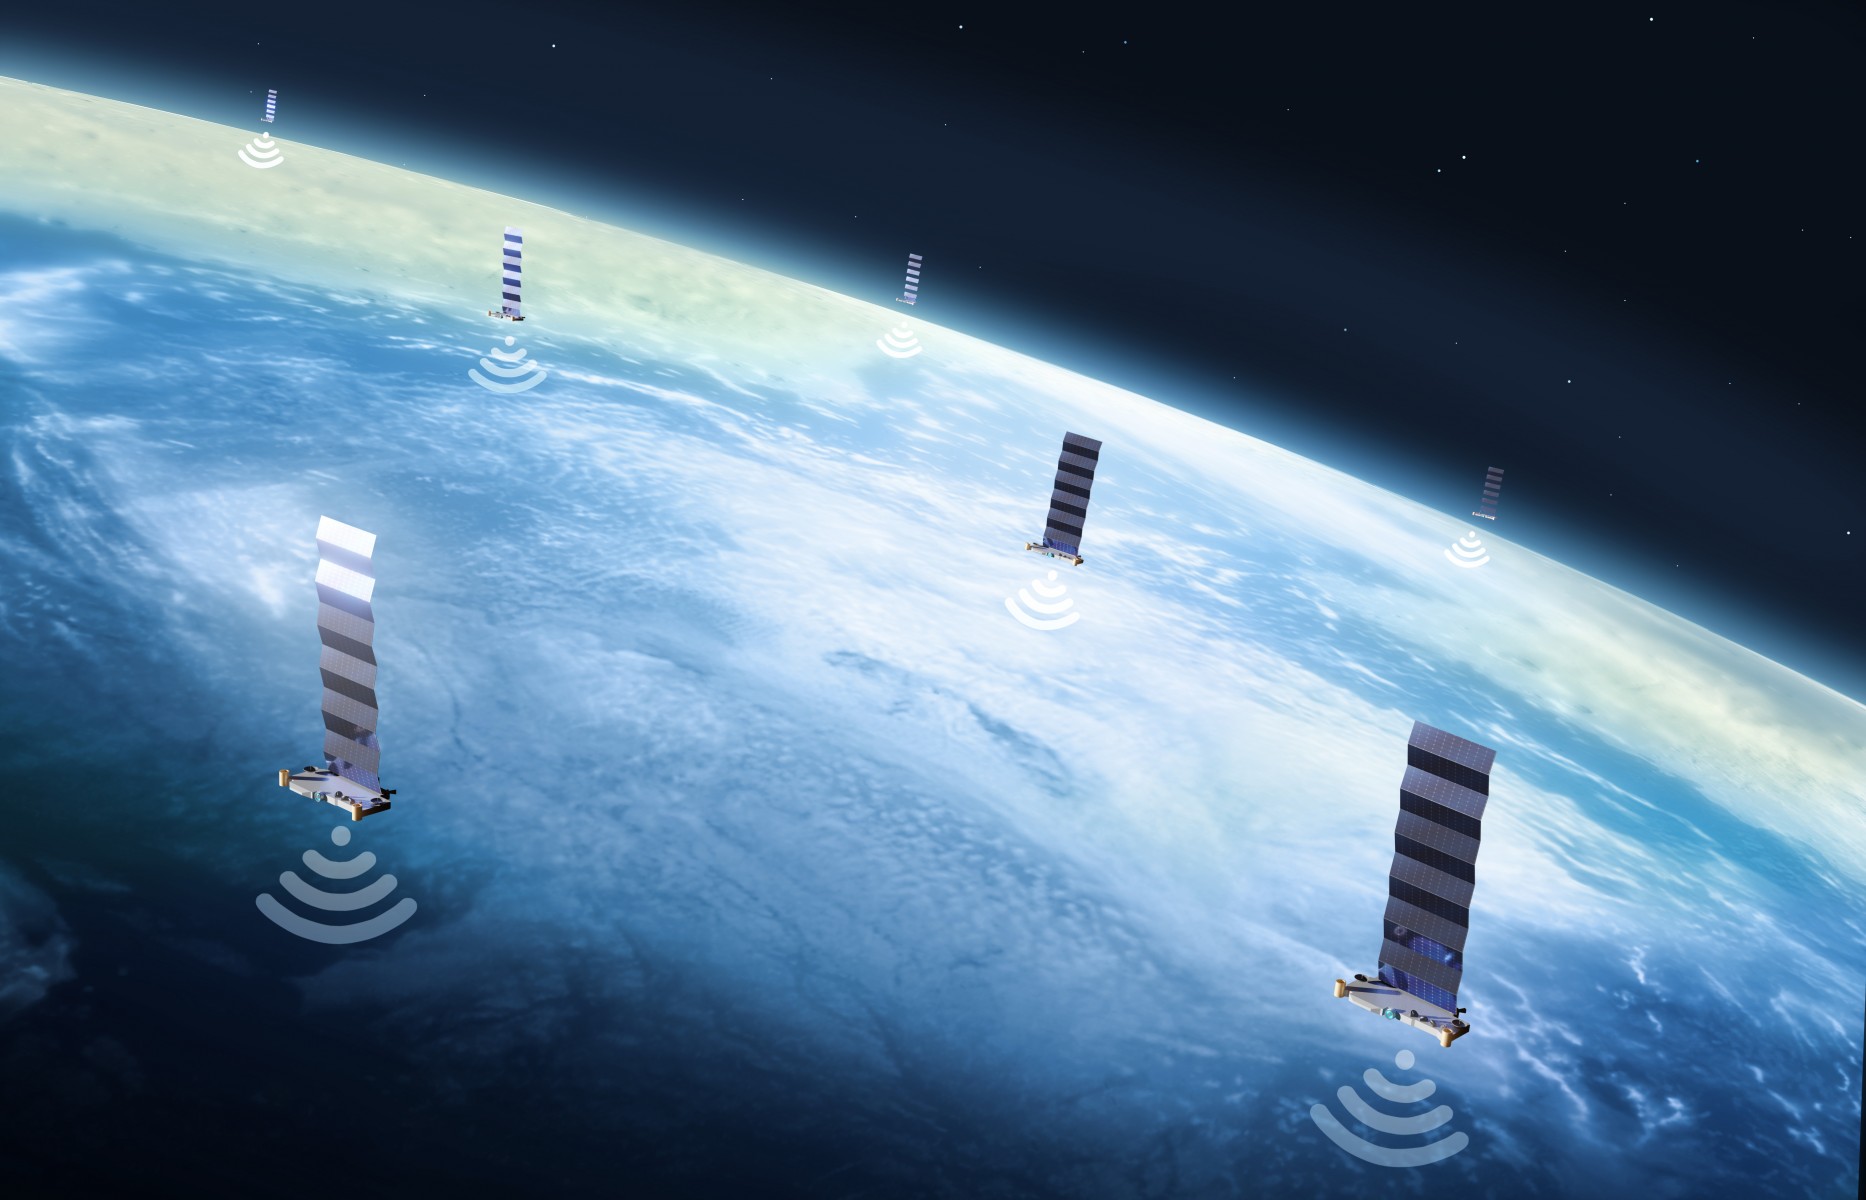 Illustration of SpaceX's Starlink network of satellites. Engineering researchers have found a way to harness the satellites' signal to use for location pinpointing and navigation. Illustration: Getty Images